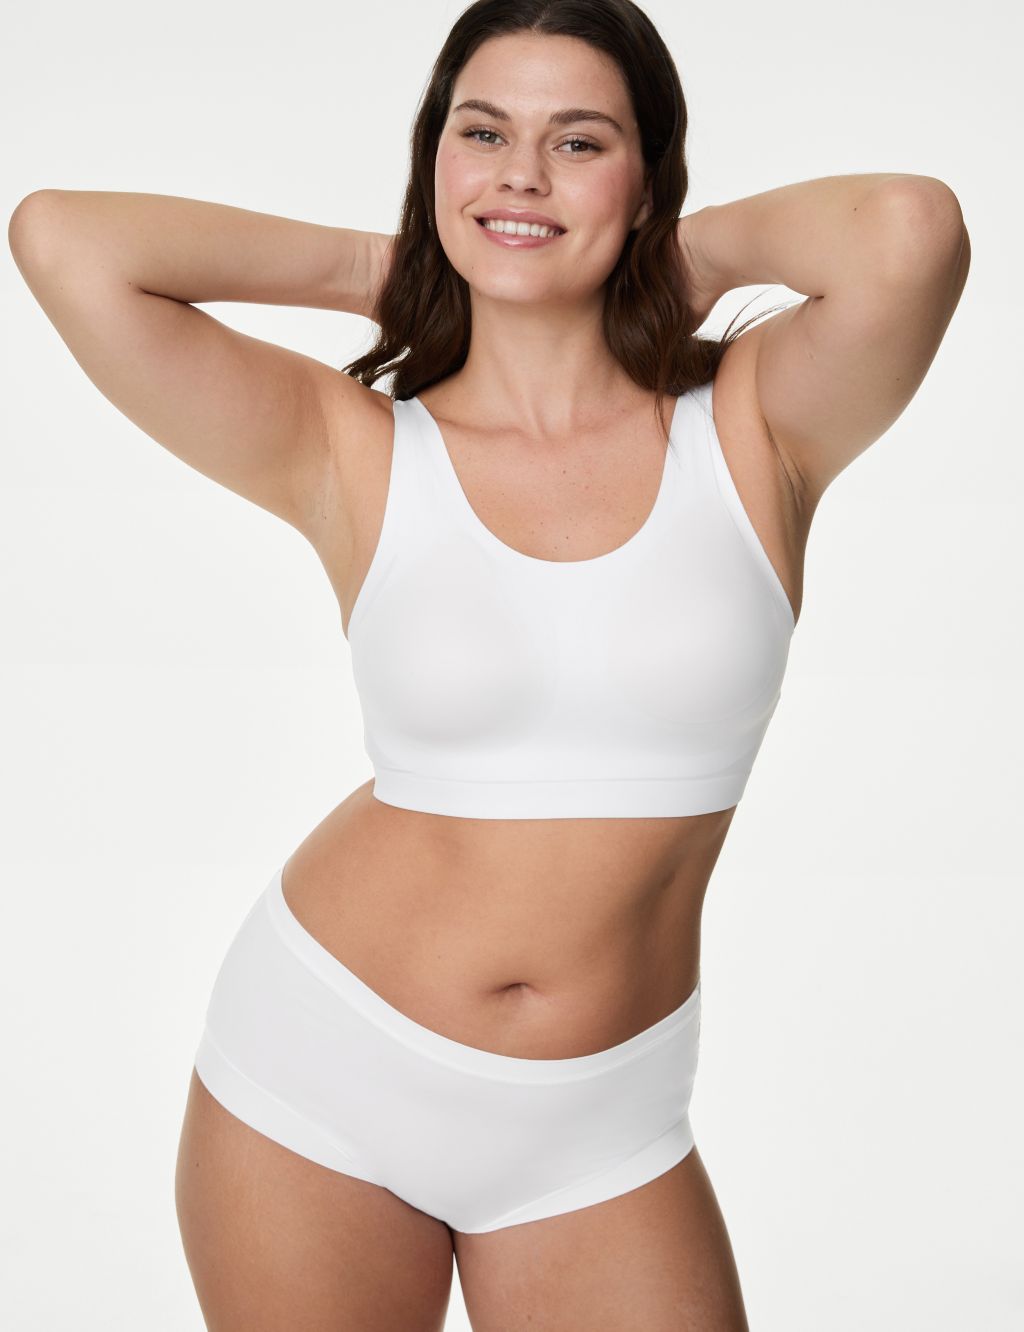 The bestselling Marks and Spencer Flexifit sleep bra is now on